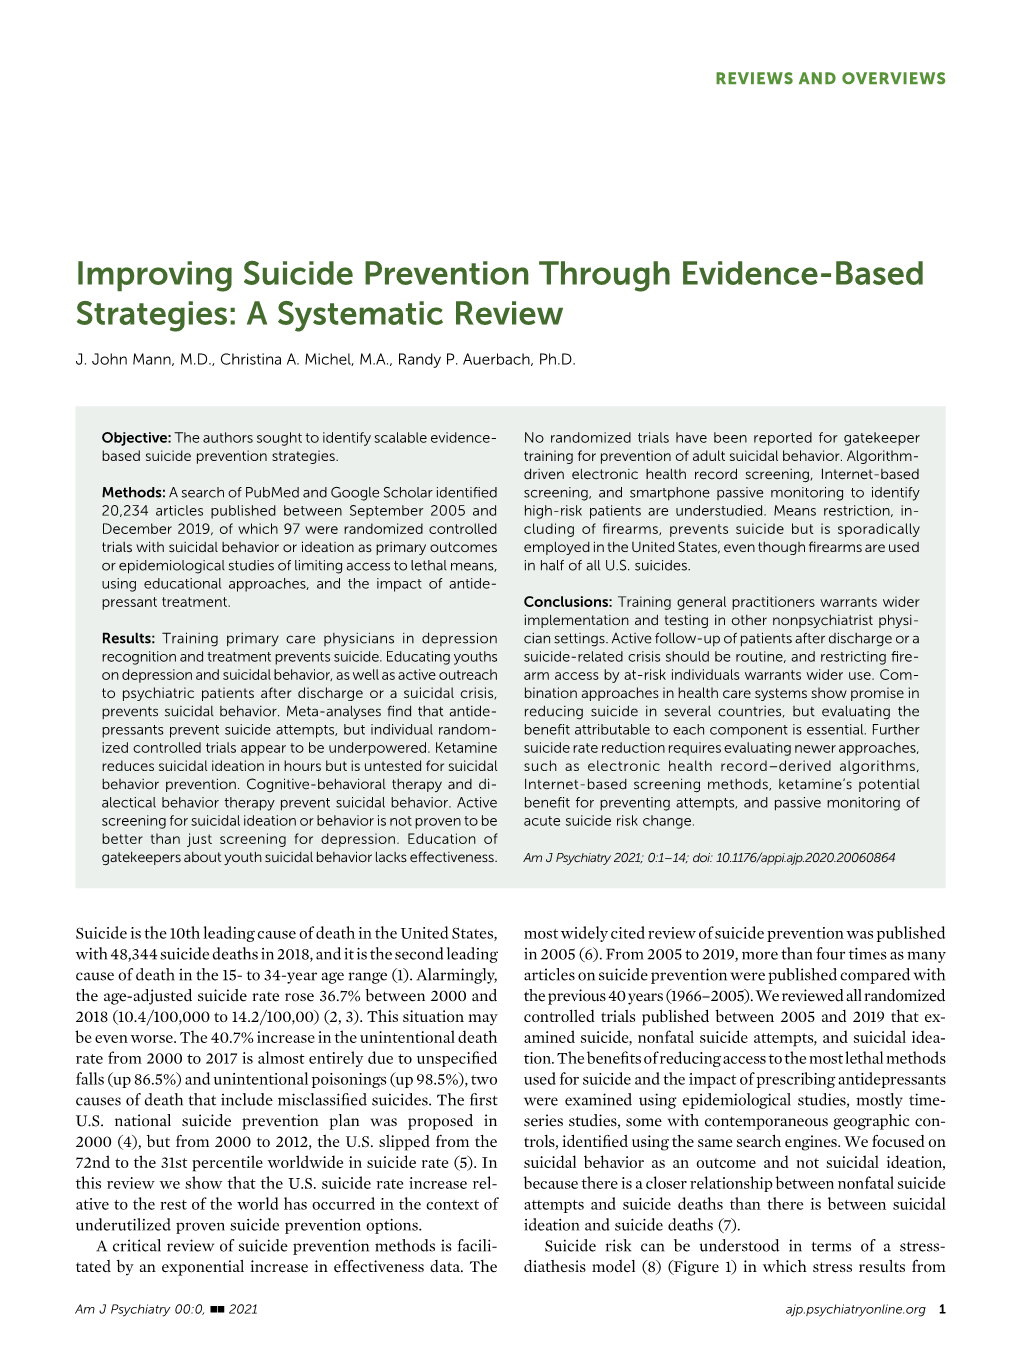 Improving Suicide Prevention Through Evidence-Based Strategies: a Systematic Review